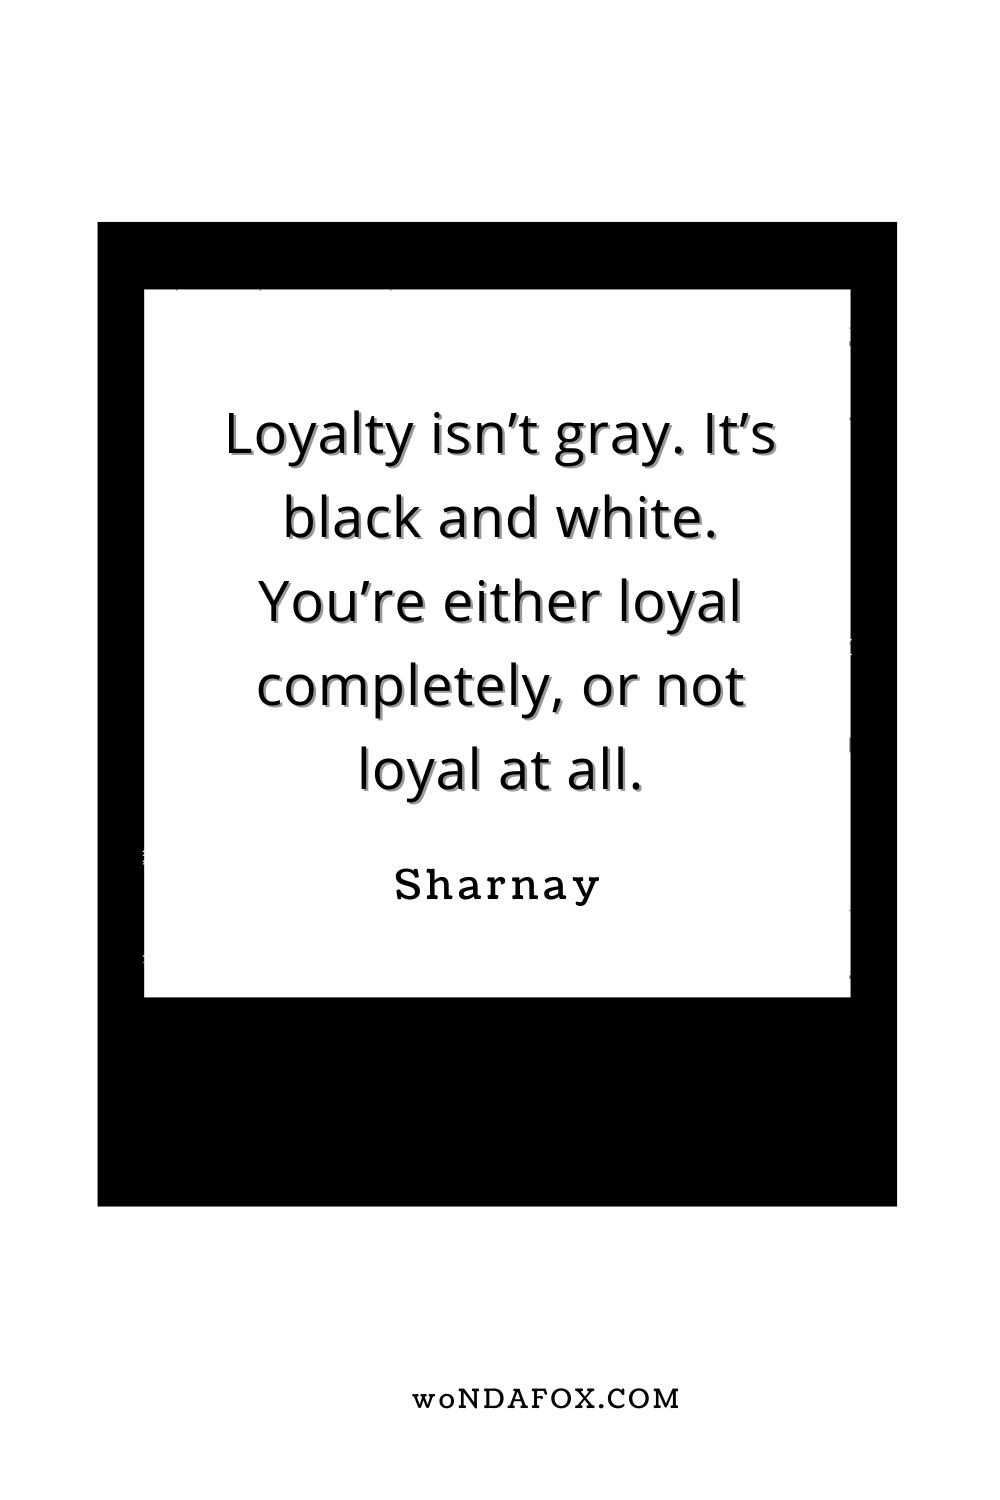 “Loyalty isn’t gray. It’s black and white. You’re either loyal completely, or not loyal at all.”